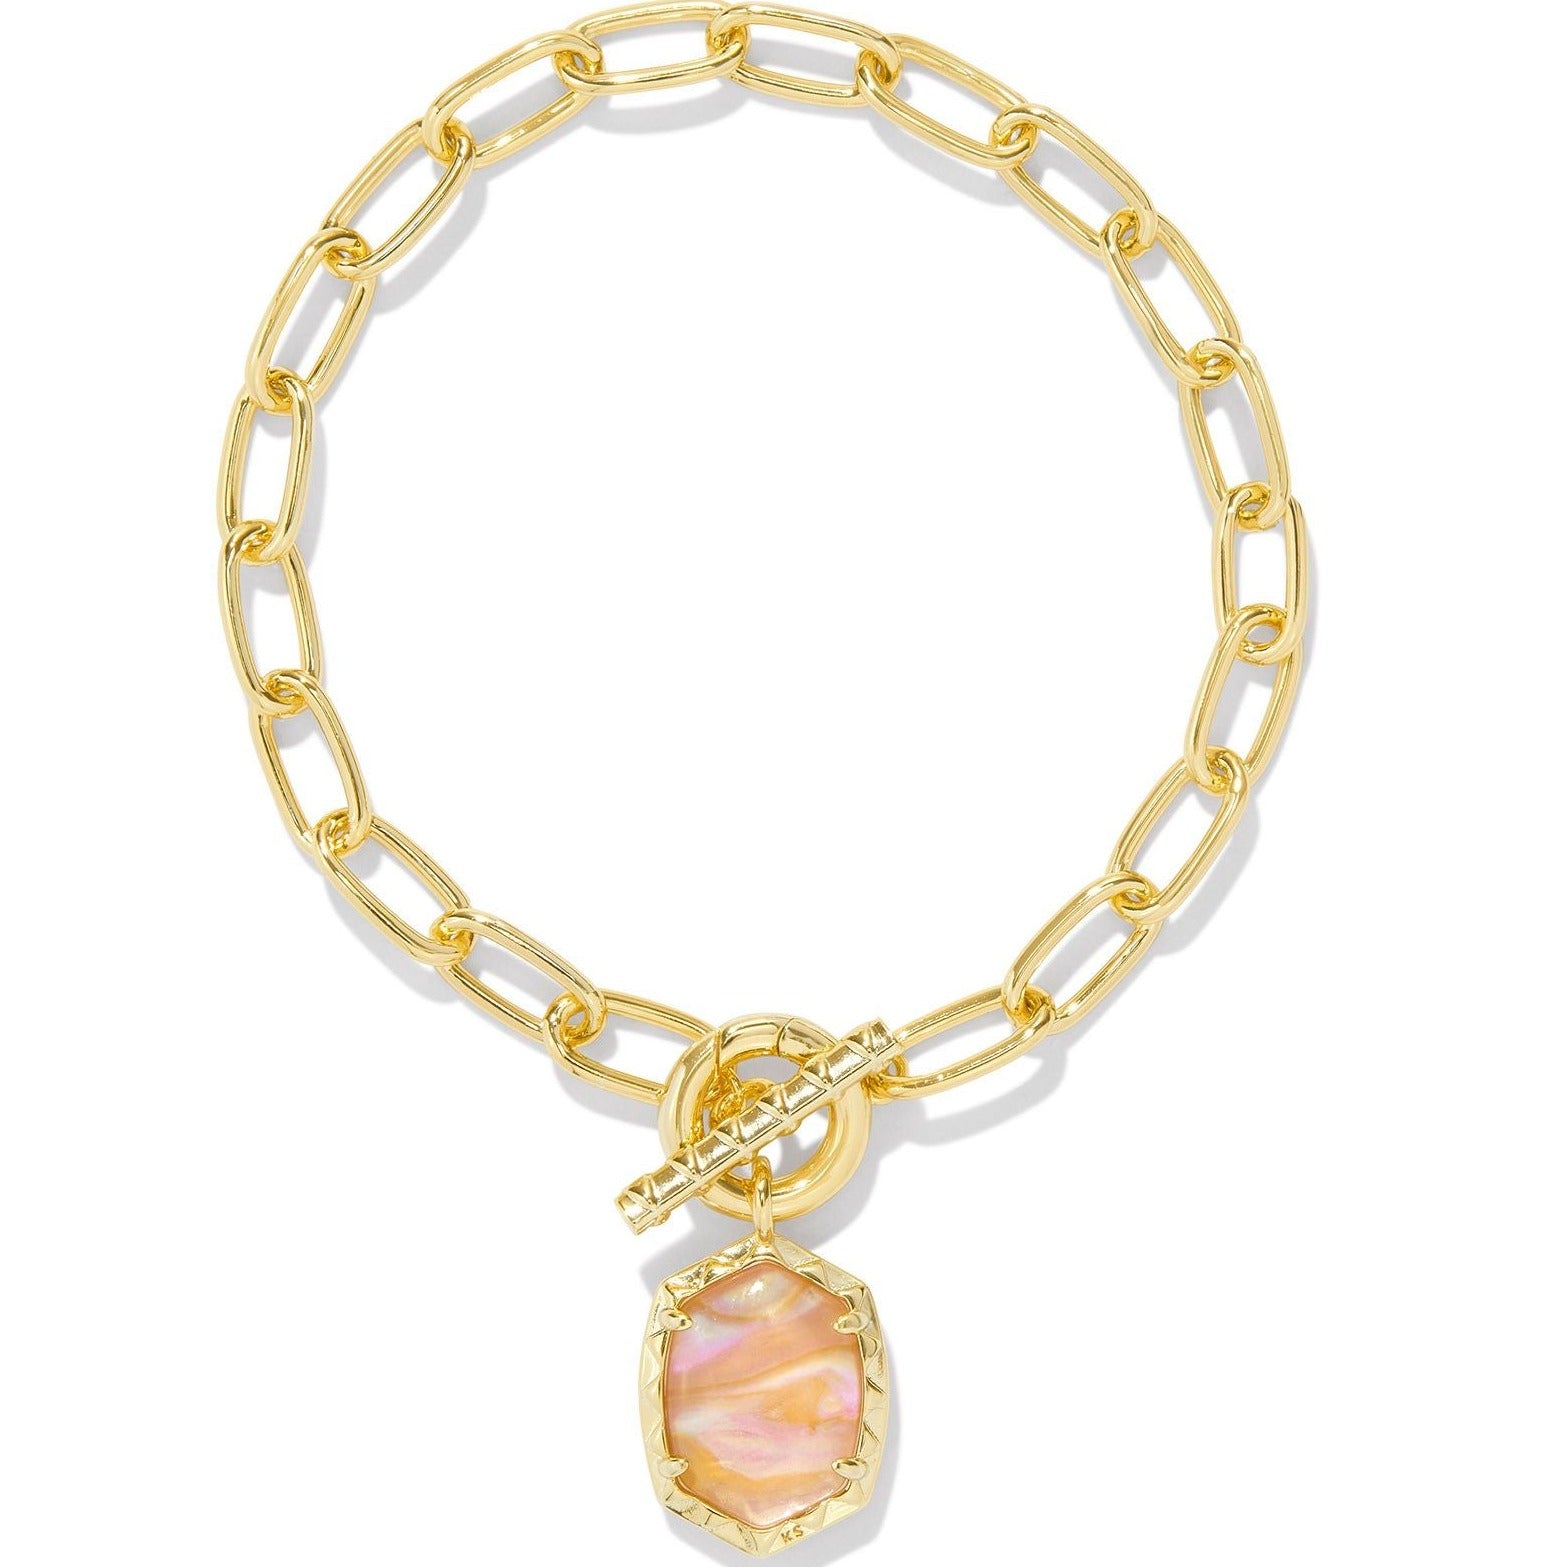 Kendra Scott | Daphne Gold Link and Chain Bracelet in Light Pink Iridescent Abalone - Giddy Up Glamour Boutique